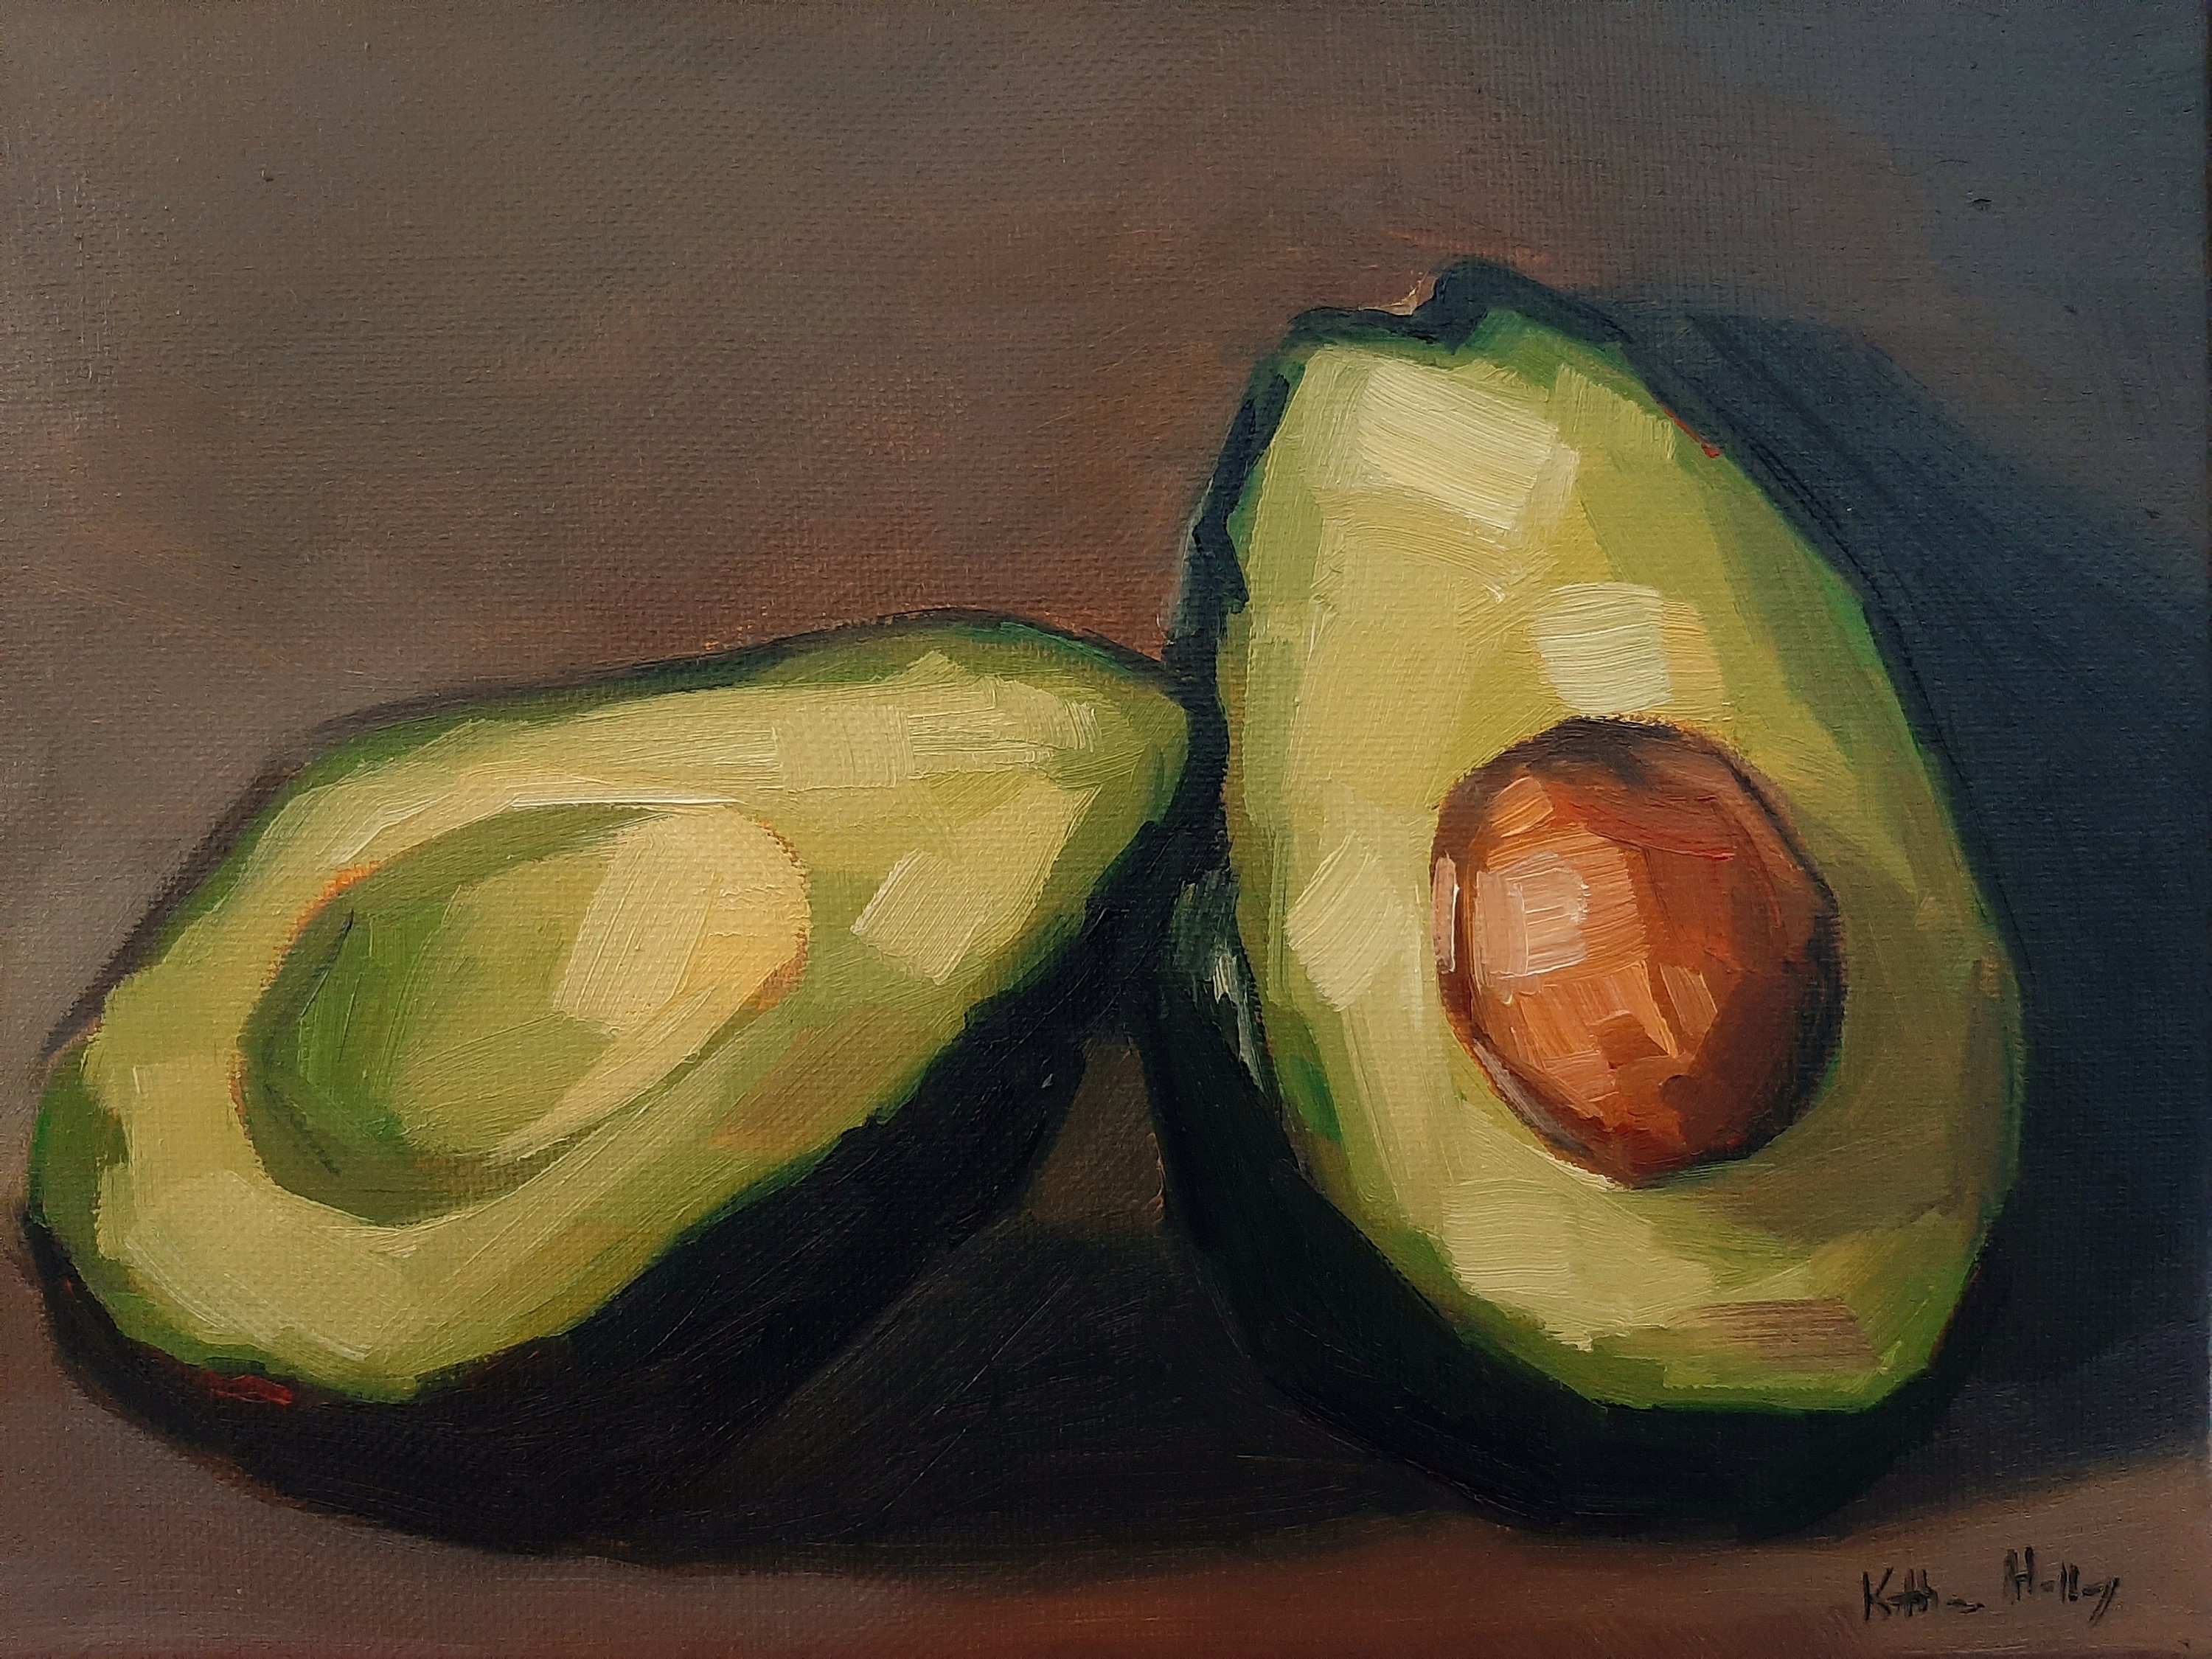 Sliced Avocado Food Oil PaintingArchival Giclee Print Poster Wall Art 